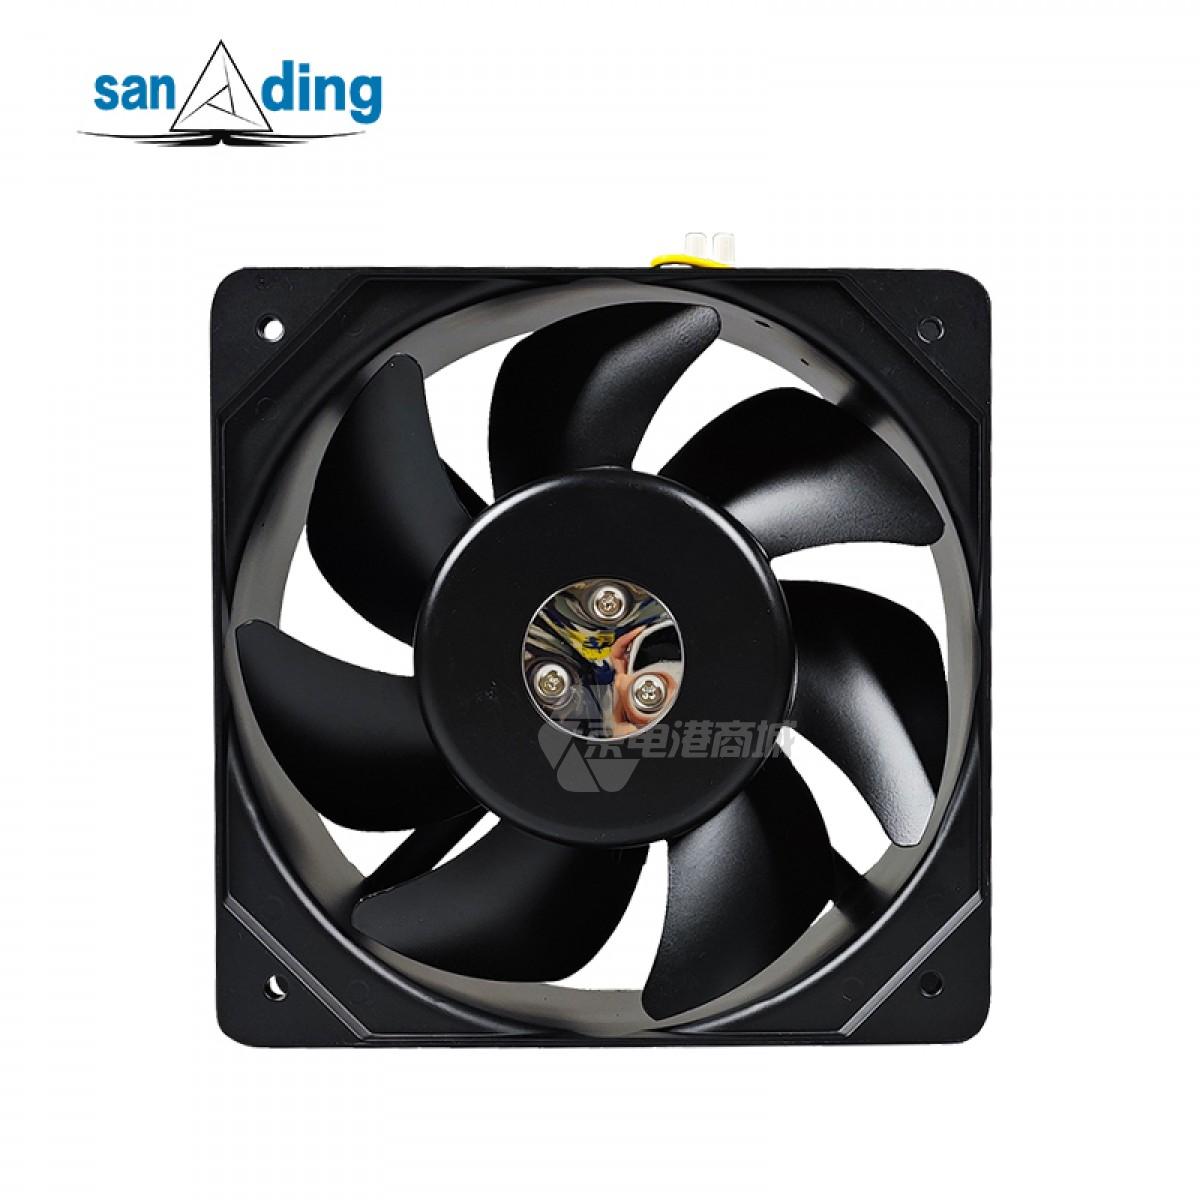 sanding A8228E-22L-B7T 230VAC 0.45A 68W 3200rpm 208×208×72mm Supporting protective net AC Fan